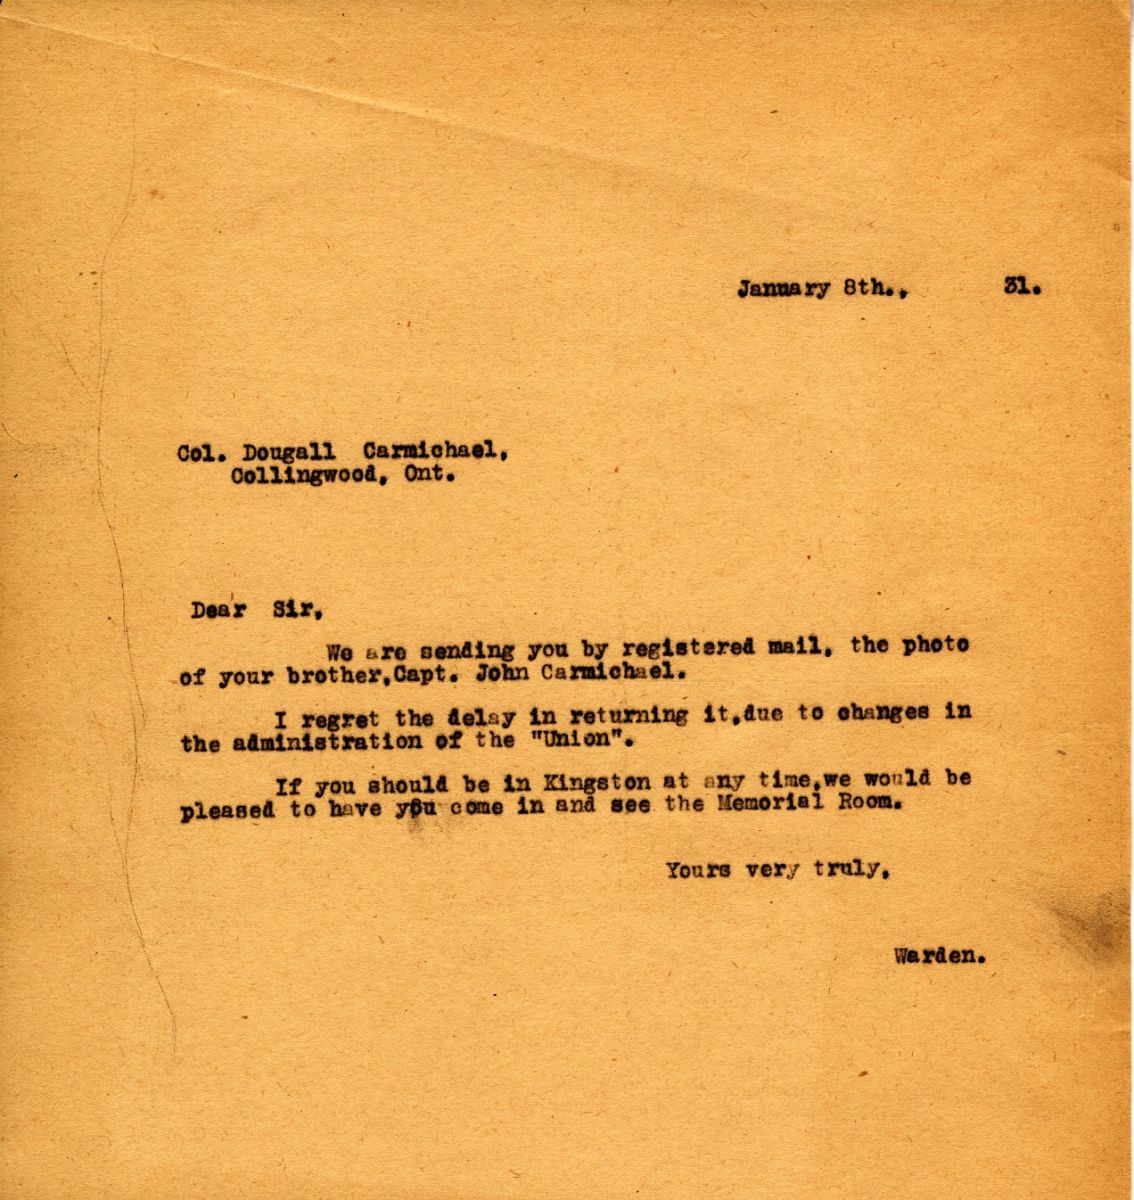 Letter from the Warden to Col. Dougall Carmichael, 8th January 1931